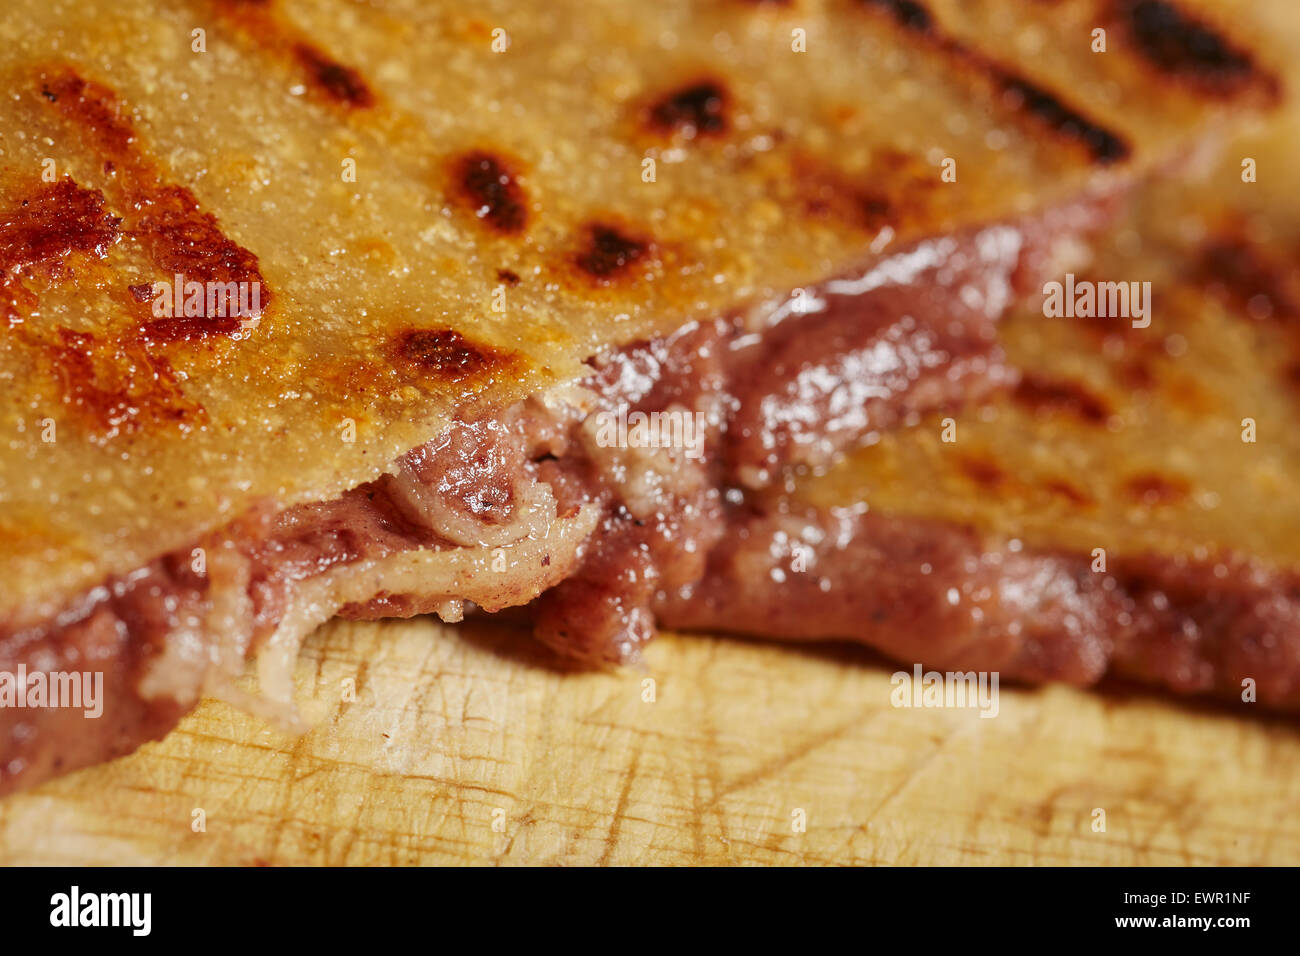 red bean and cheese pupusa, a typical street food from Honduras and El Salvador Stock Photo